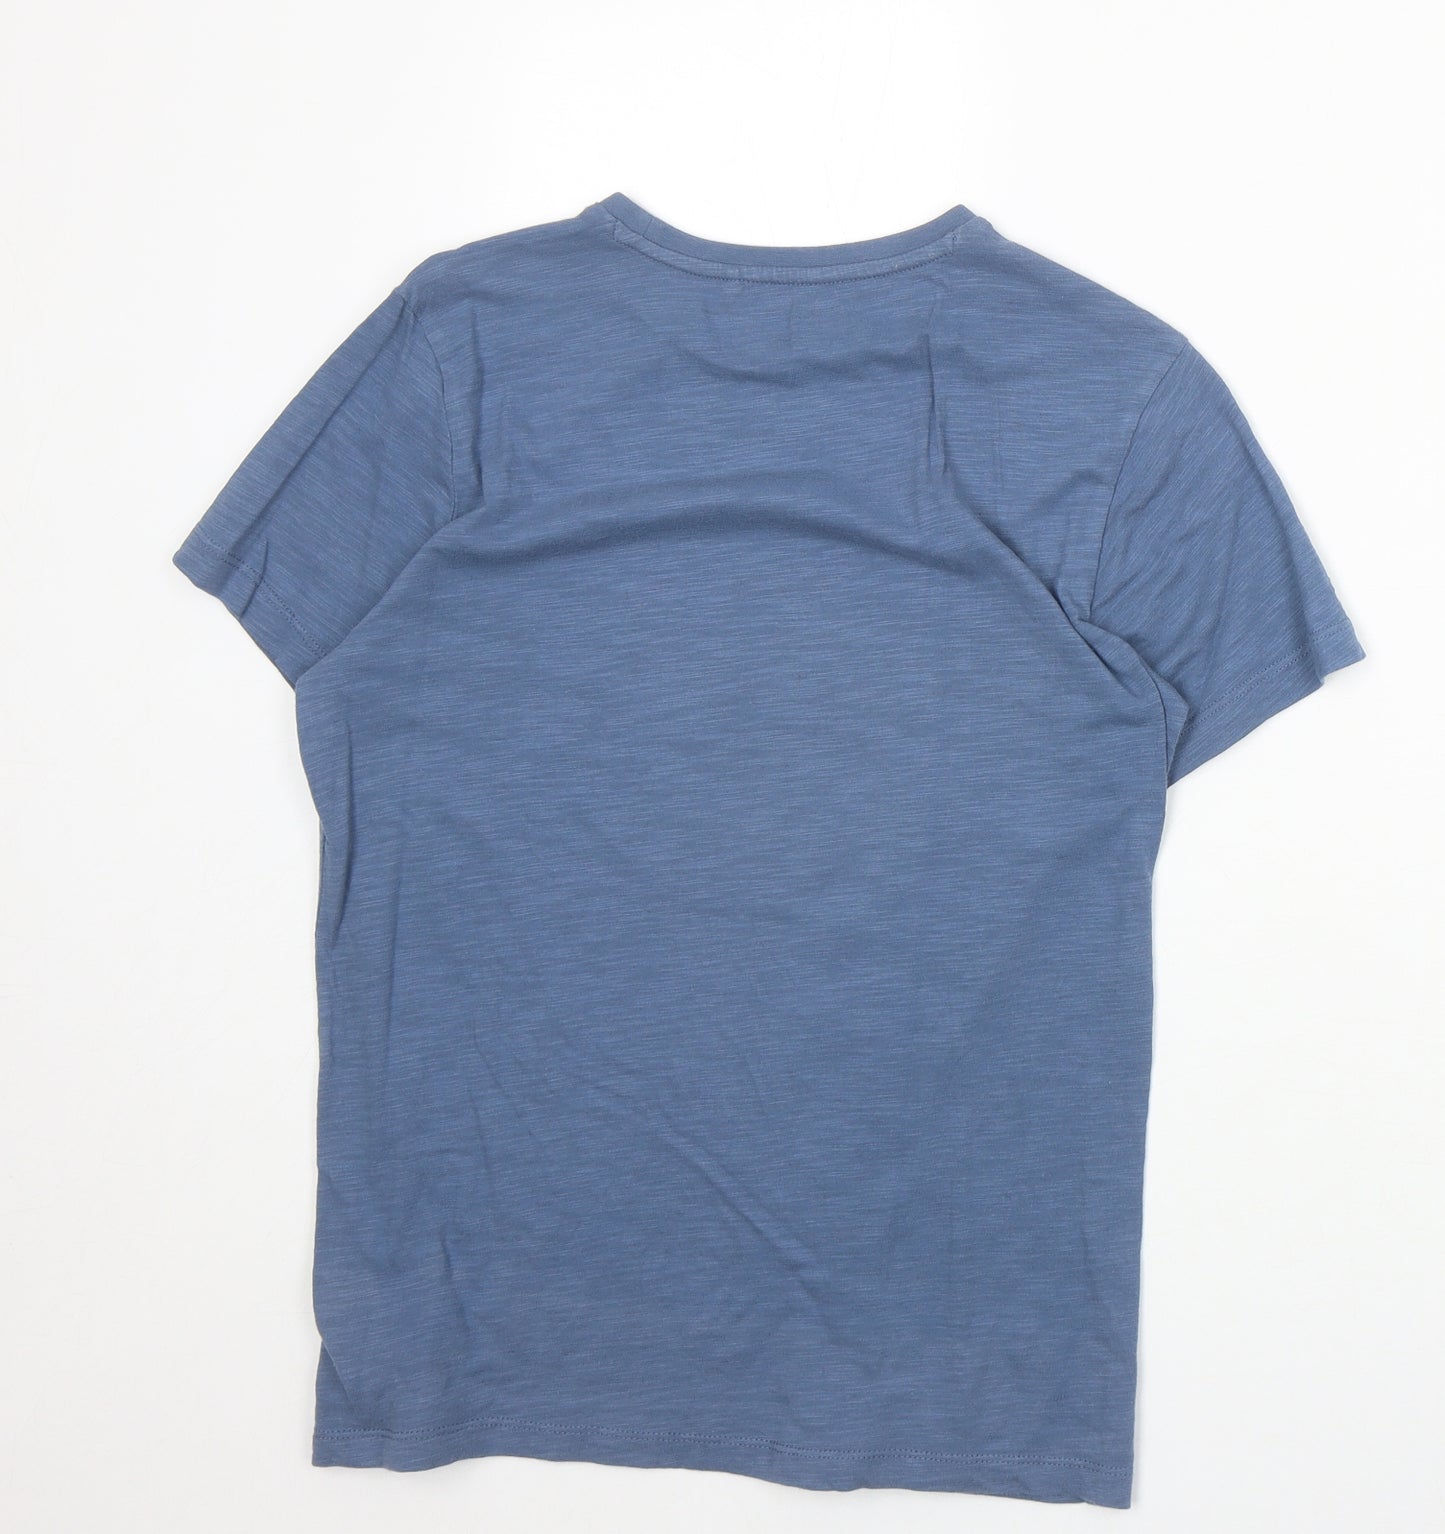 NEXT Boys Blue 100% Cotton Basic T-Shirt Size 12 Years Round Neck Pullover - Eat Sleep Smile Repeat